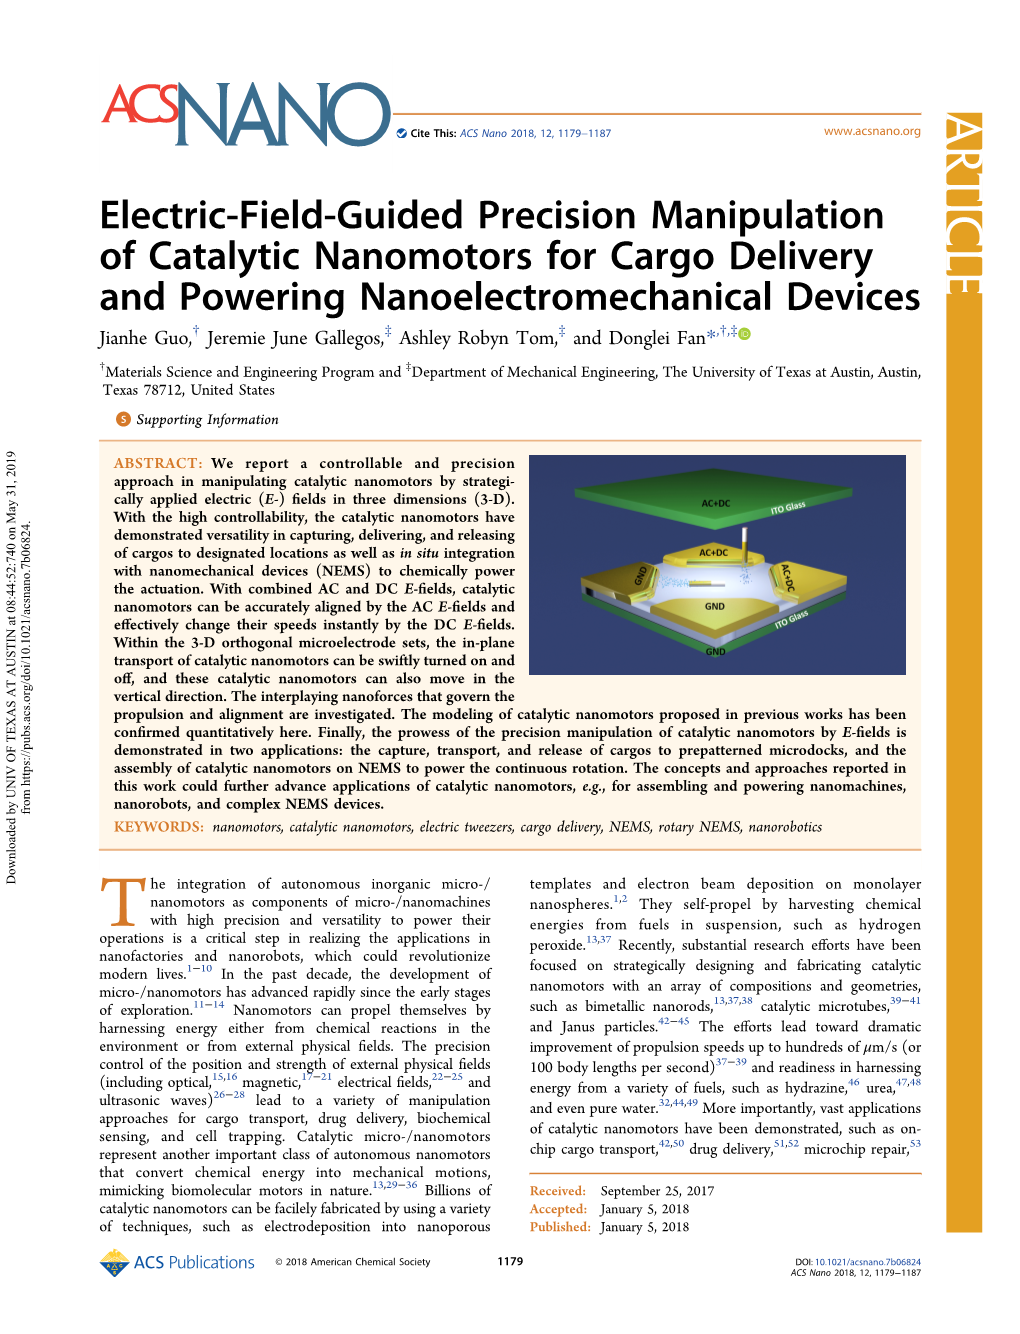 Electric-Field-Guided Precision Manipulation of Catalytic